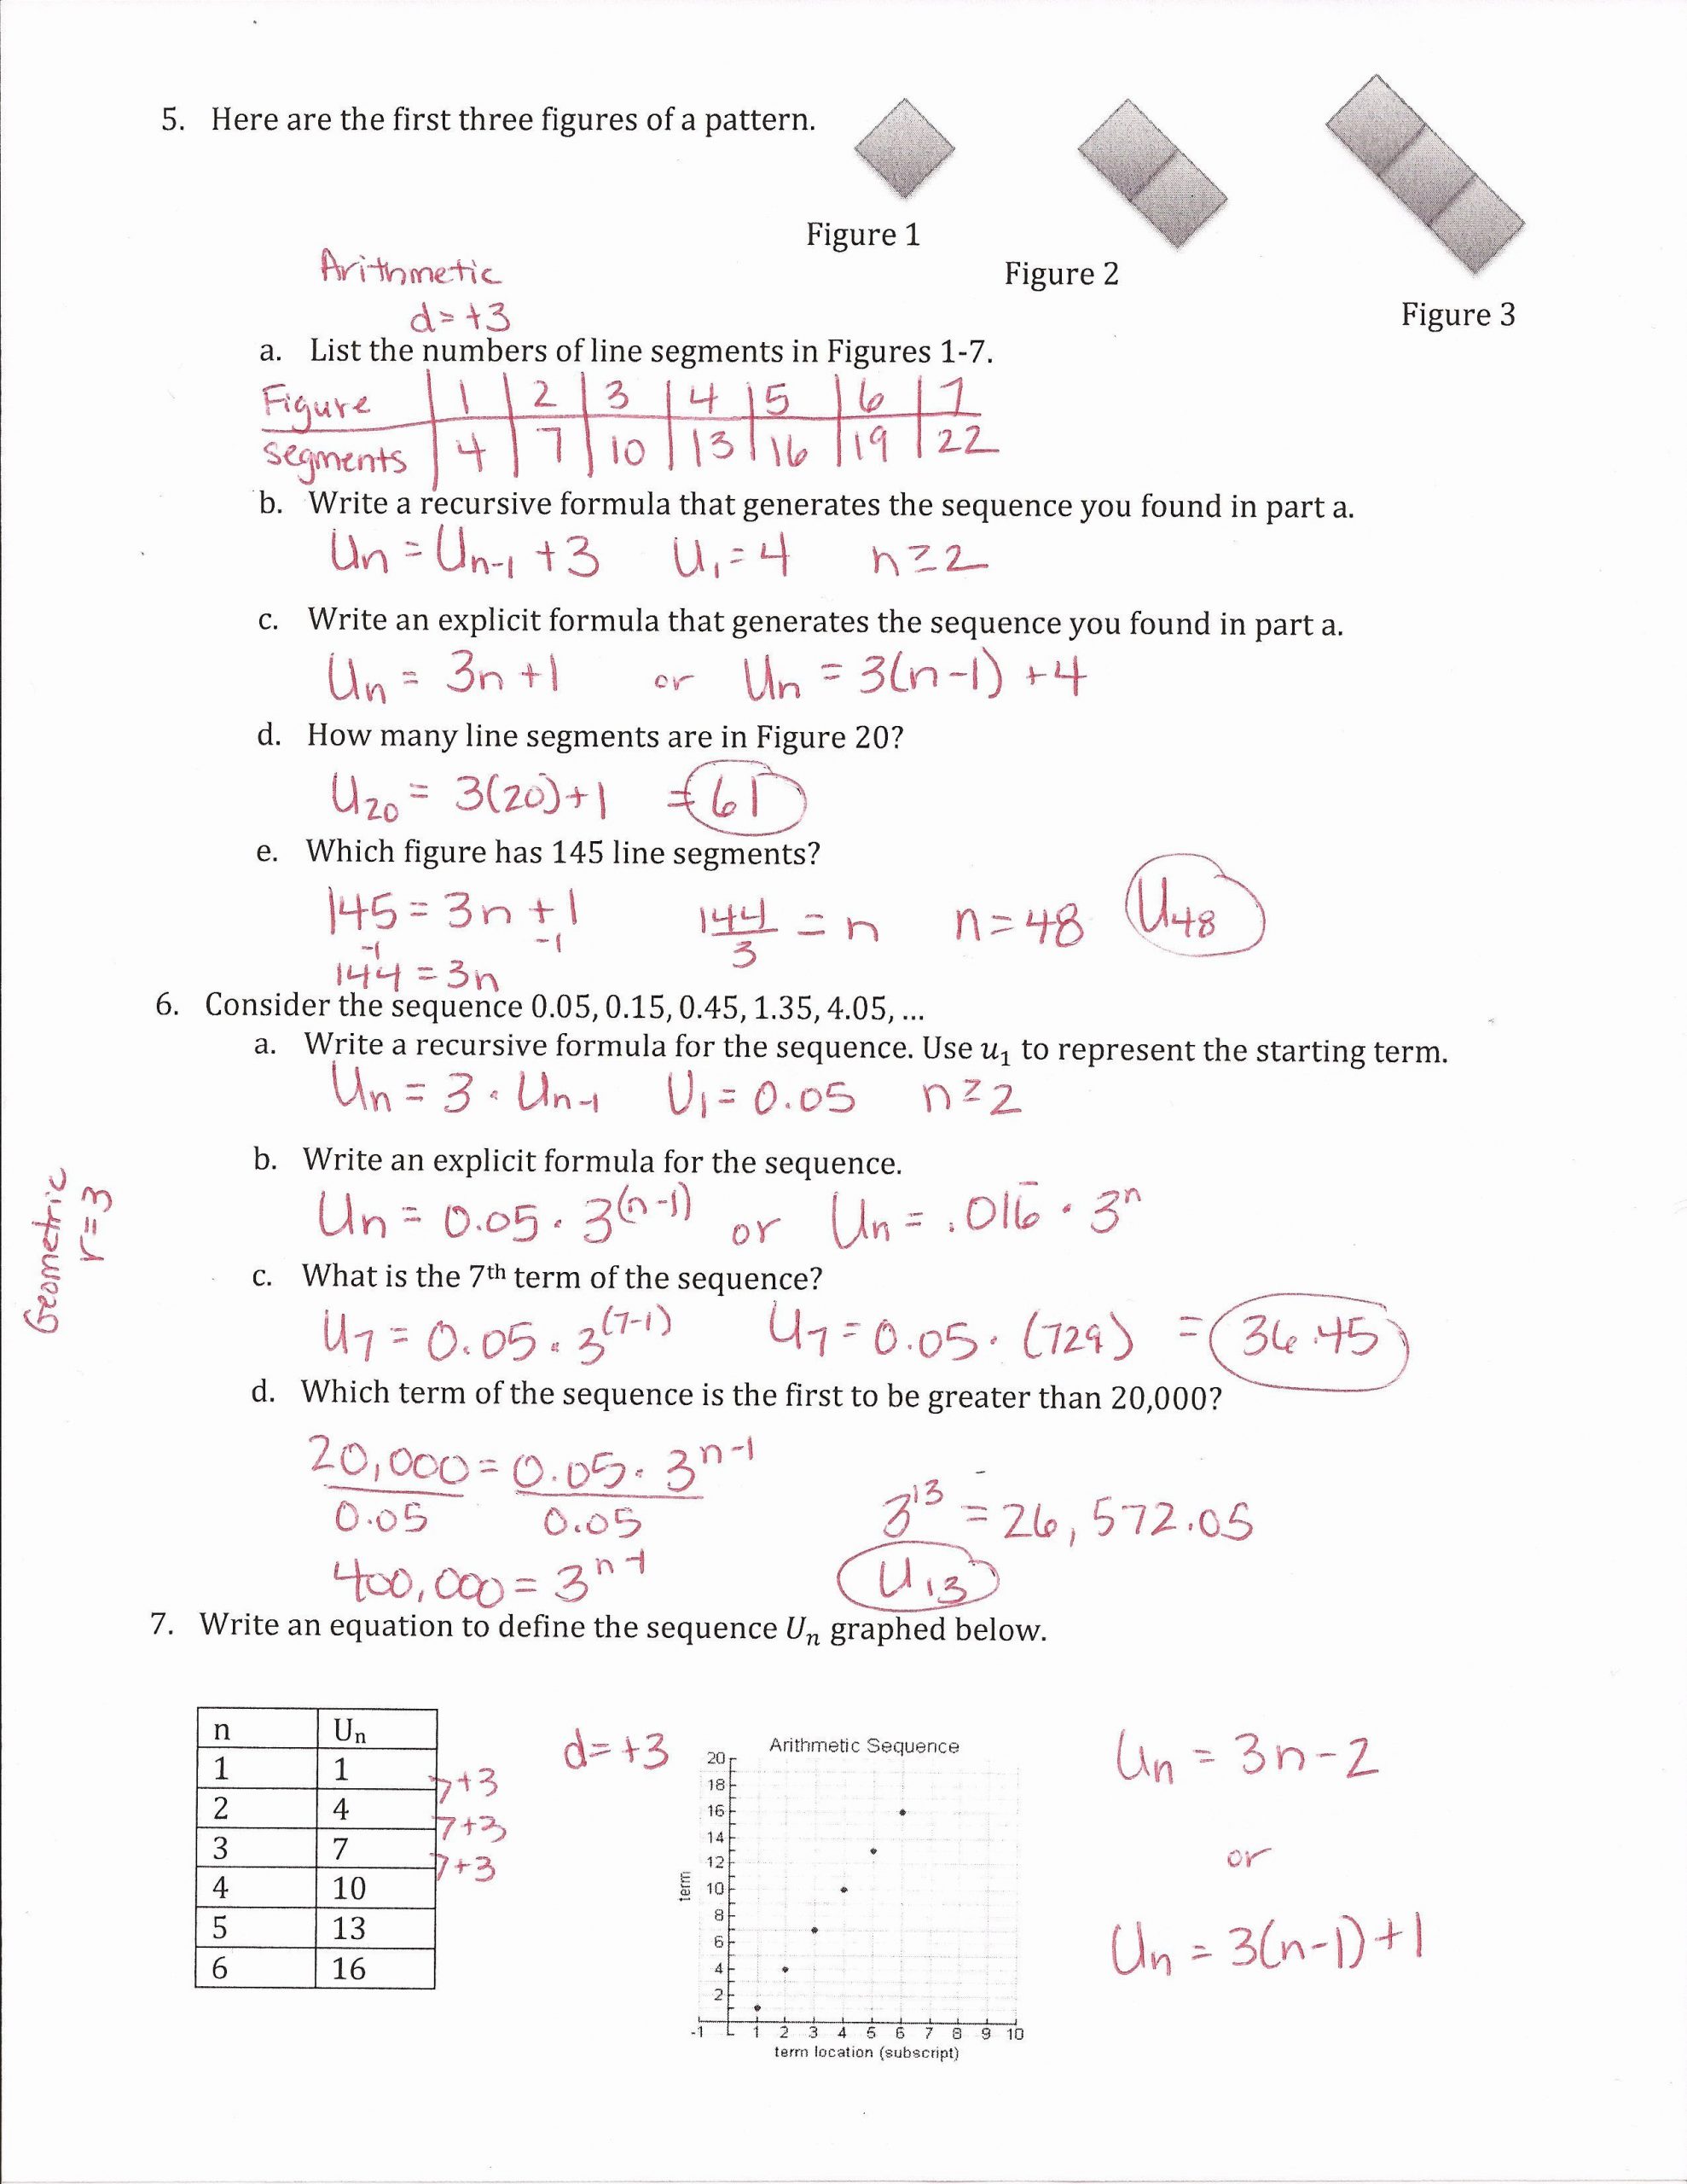 Arithmetic Sequence Worksheet with Answers 50 Arithmetic Sequence Worksheet Answers In 2020